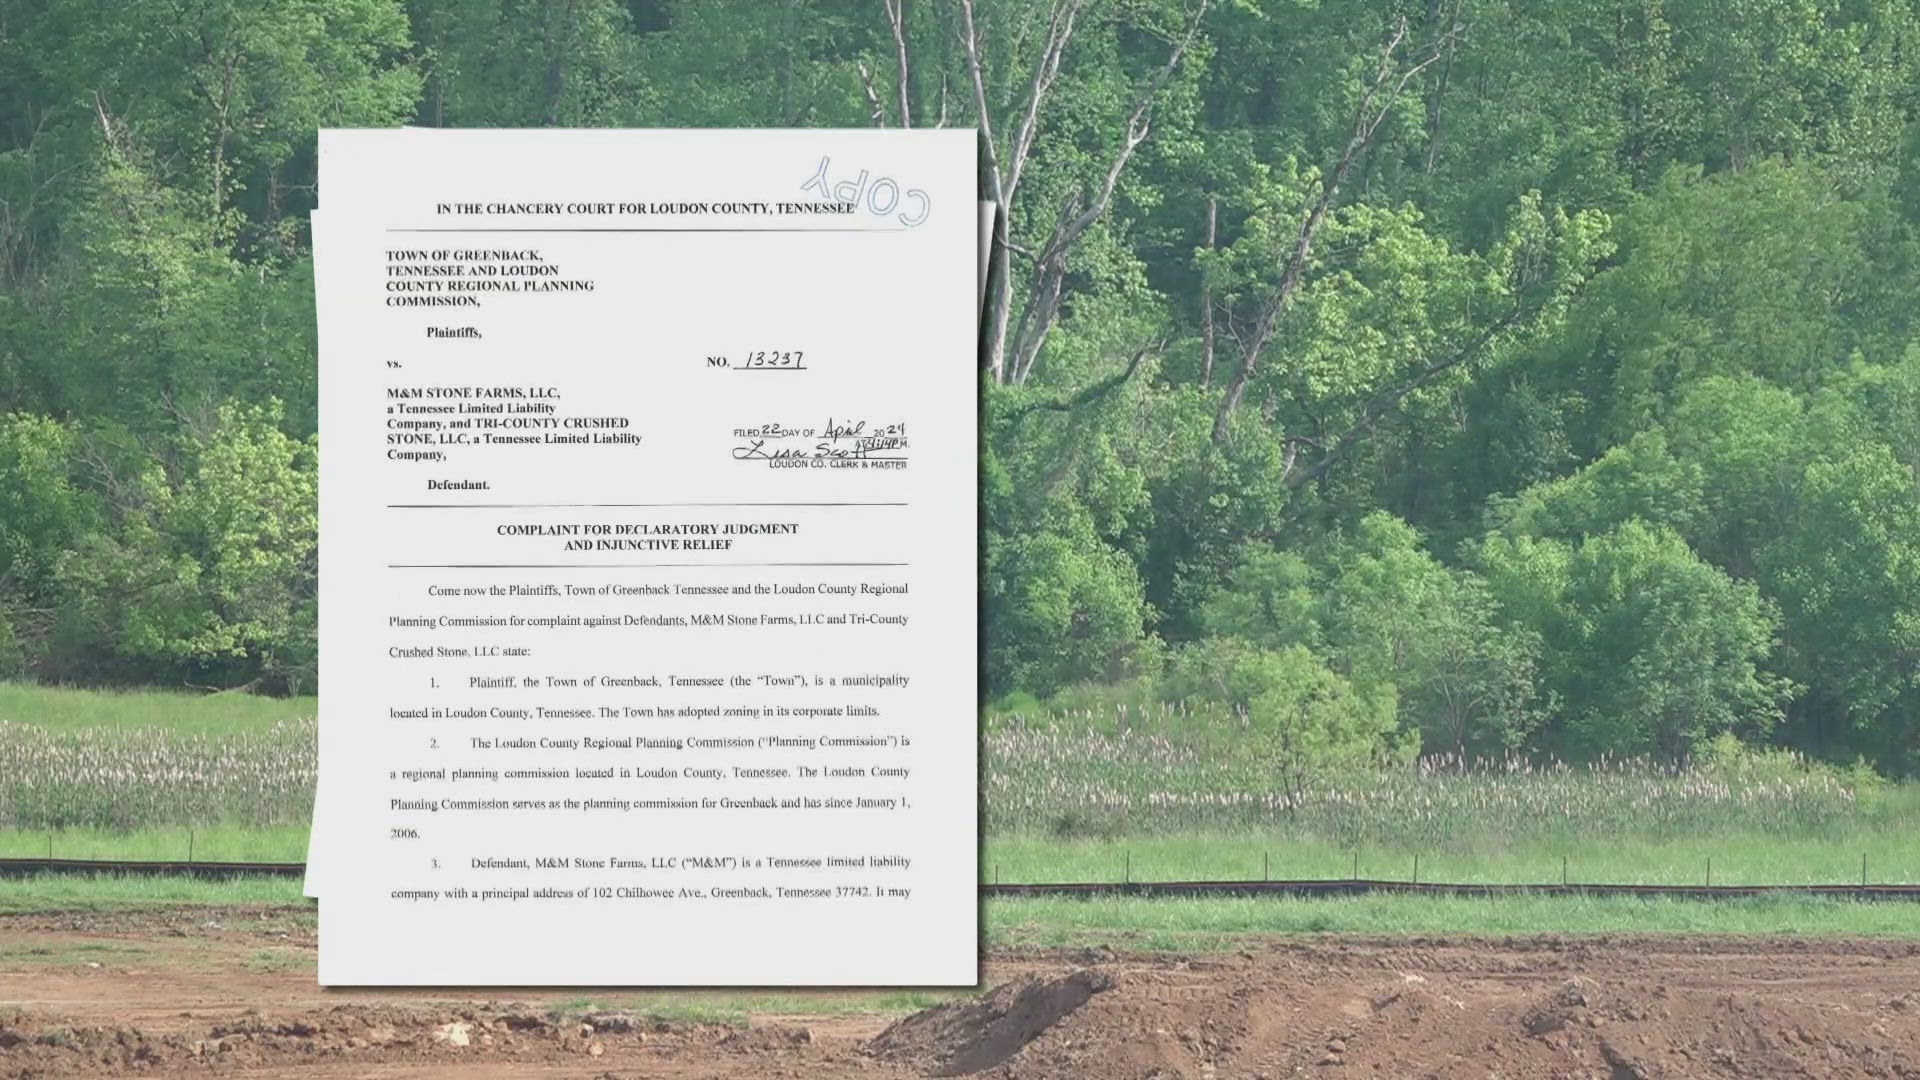 The quarry operator and property owner said the town's actions have been unconstitutional.